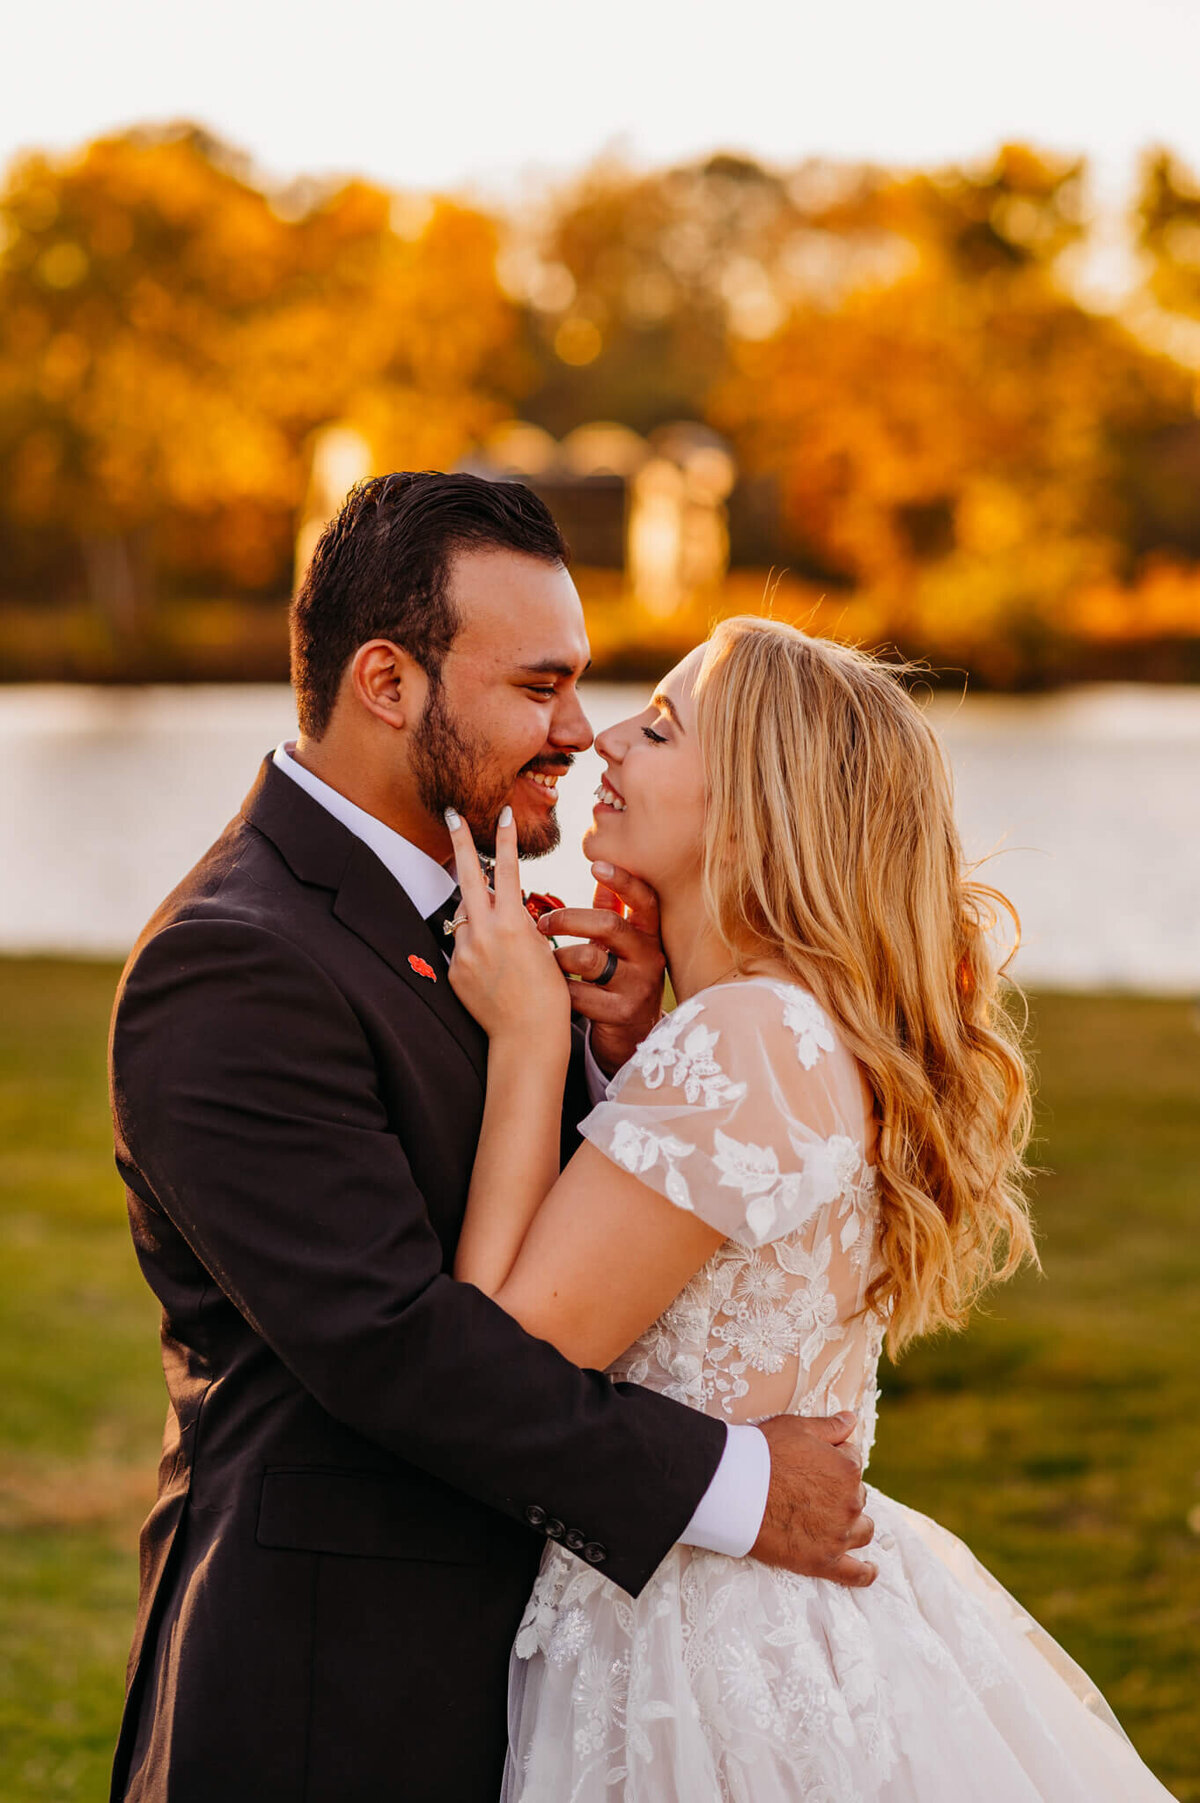 photo of a bride and groom holding each others' faces and smiling at each other